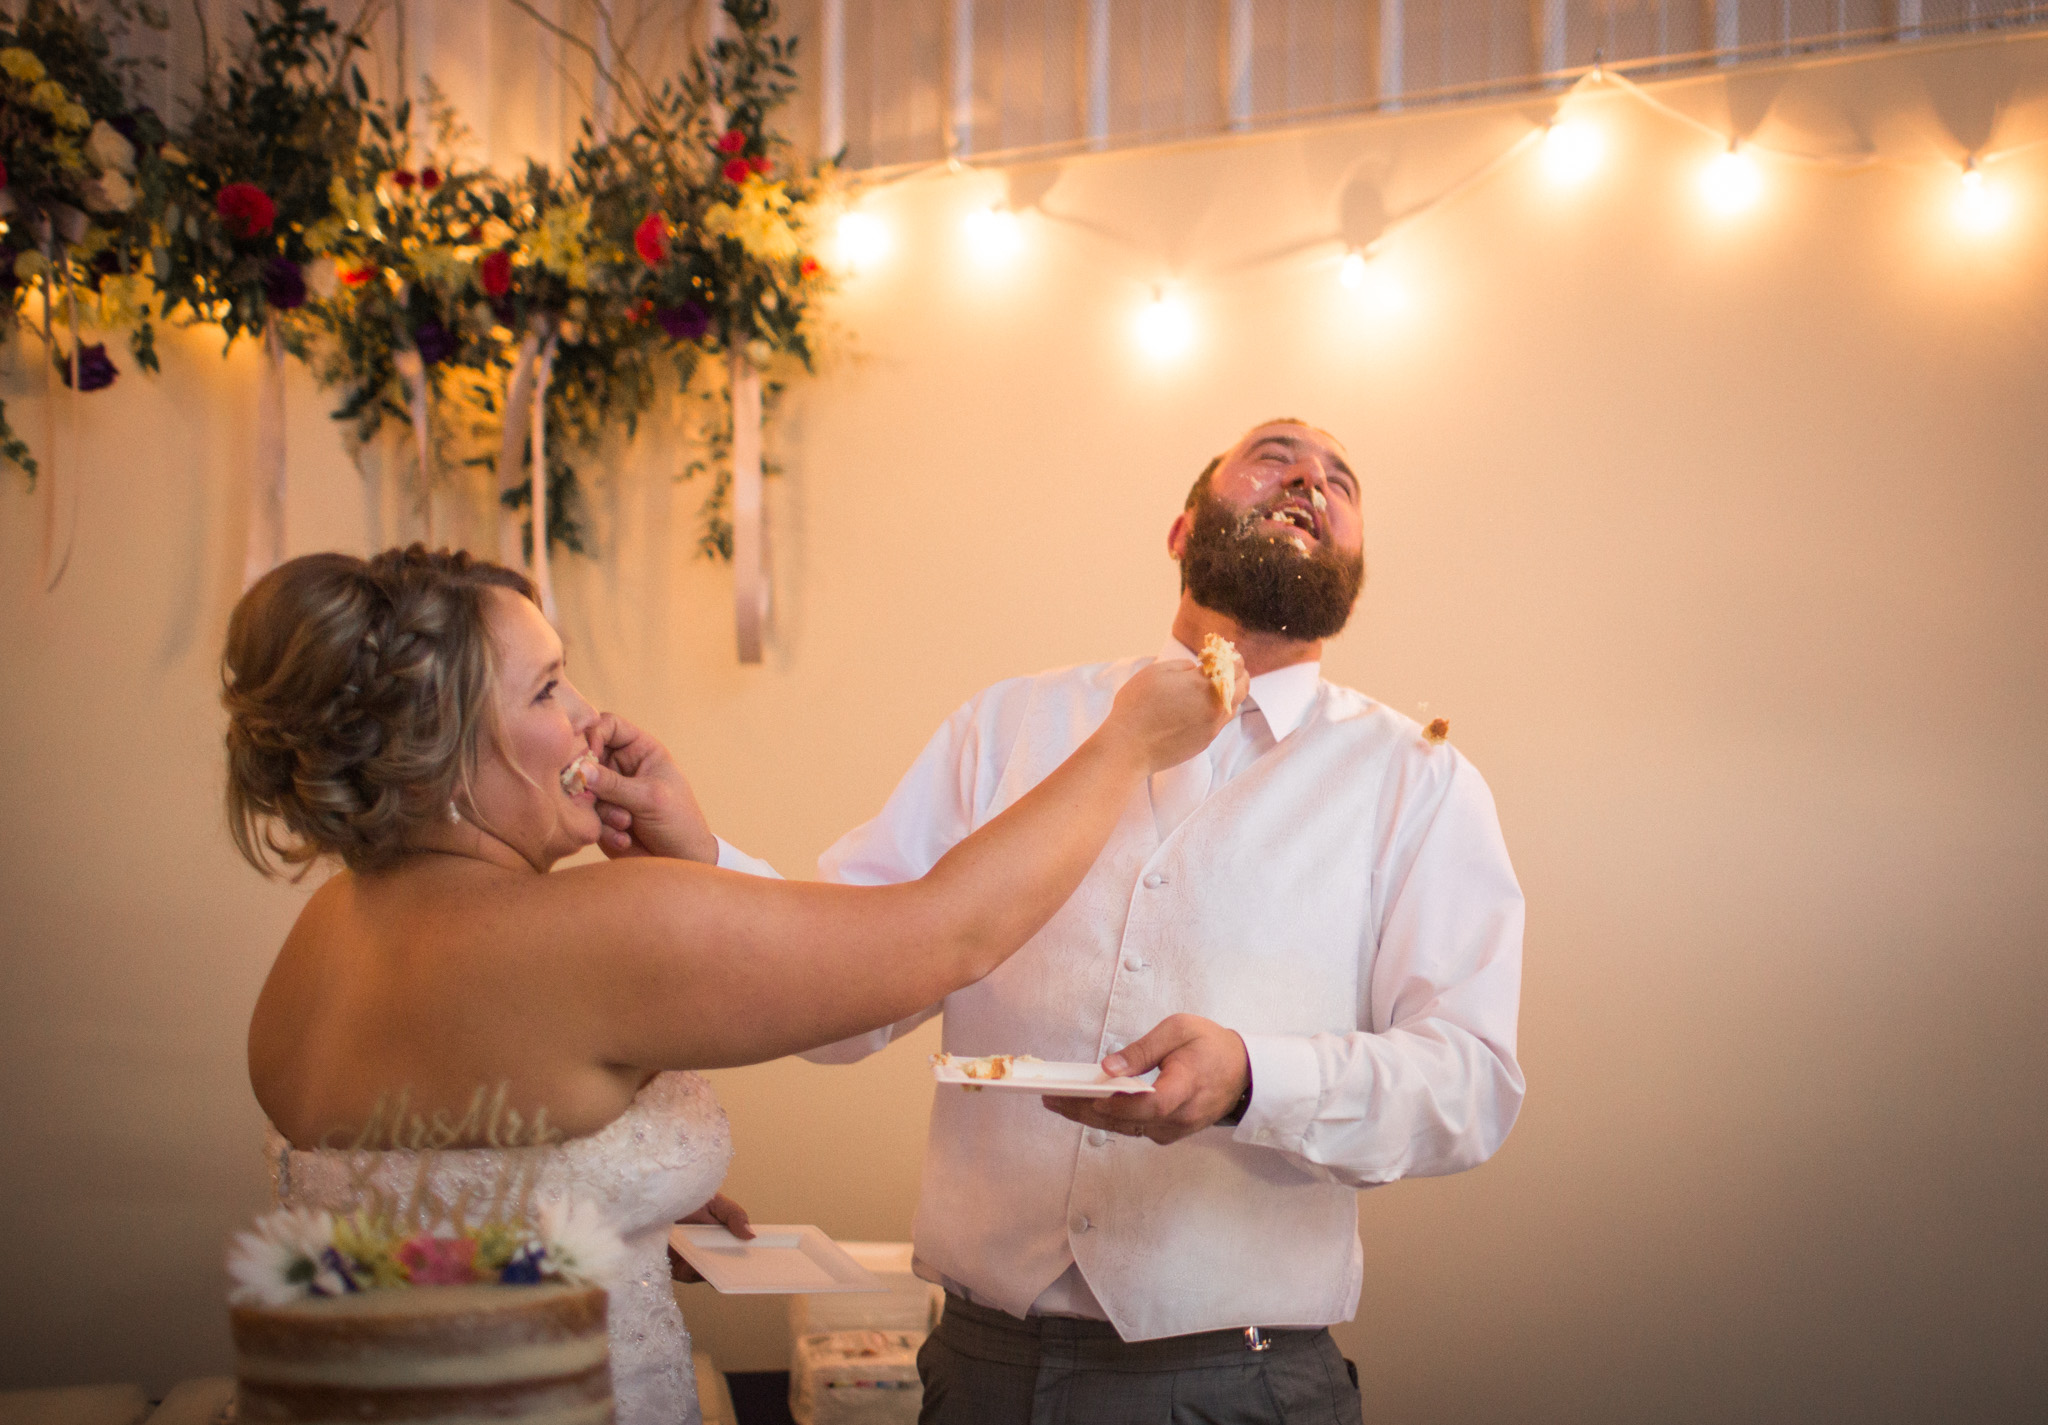 Zibell Spring Wedding, Bride and Groom, Powerful, Connected, Exploration, Laura Duggleby Photography -151.JPG